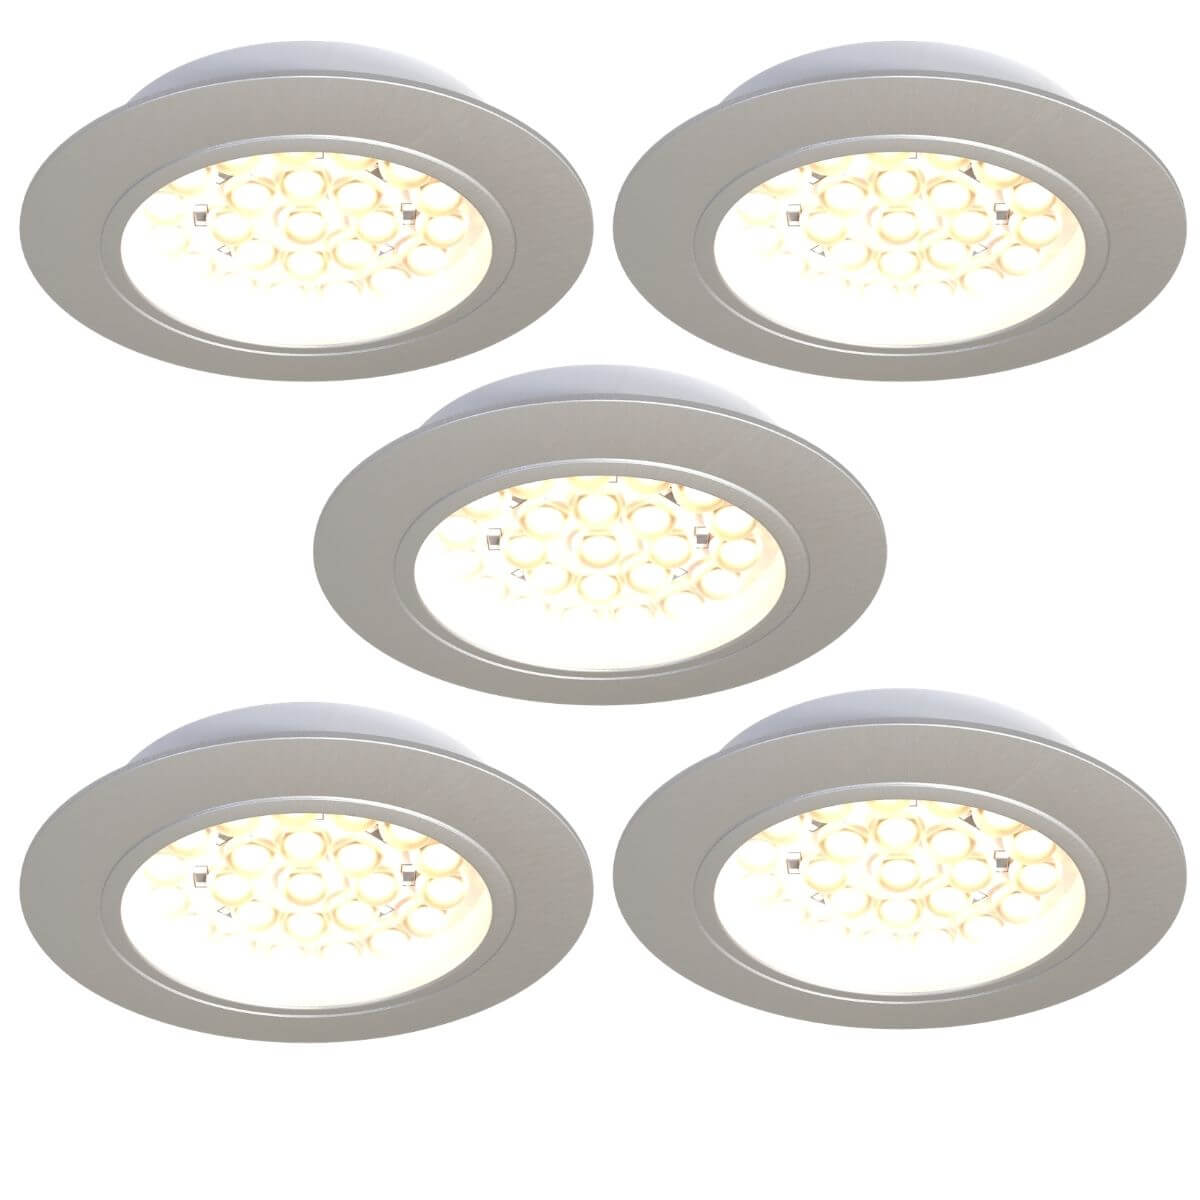 View 5 Pack Recessed LED Under Cabinet Lights Cool White or Warm White information